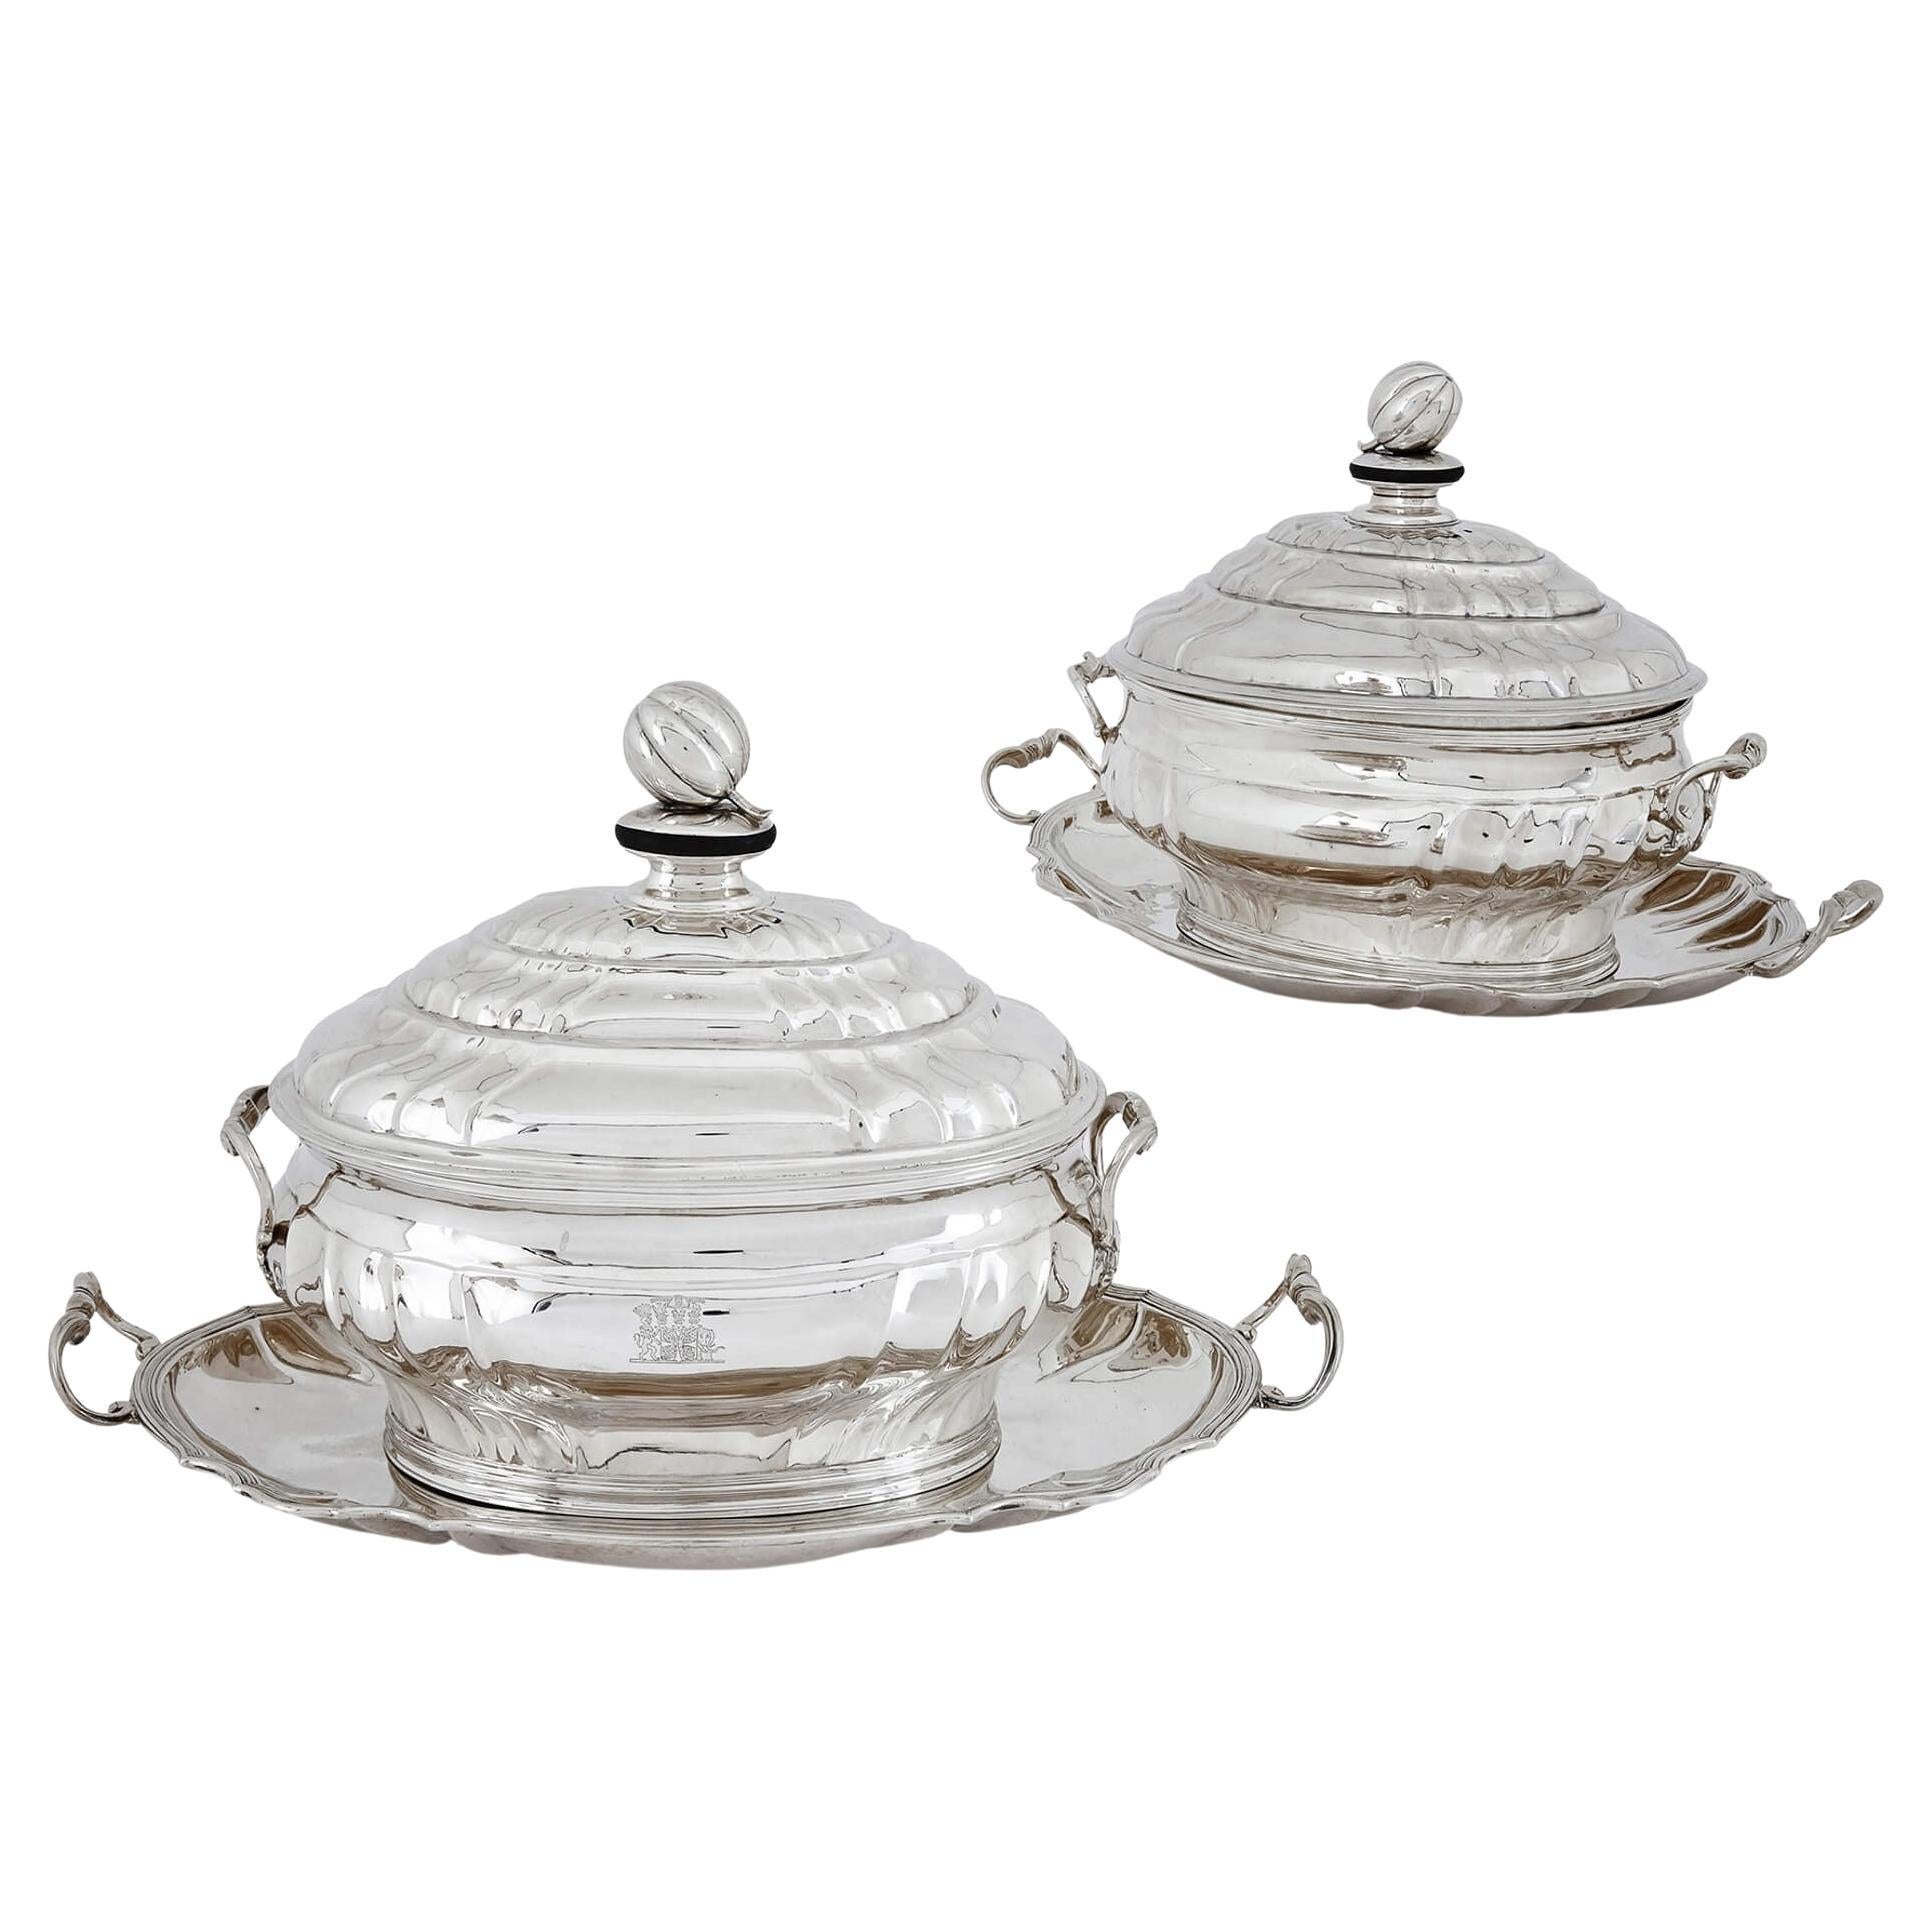 Pair of Rare Danish Eighteenth-Century Silver Soup Tureens with Trays For Sale